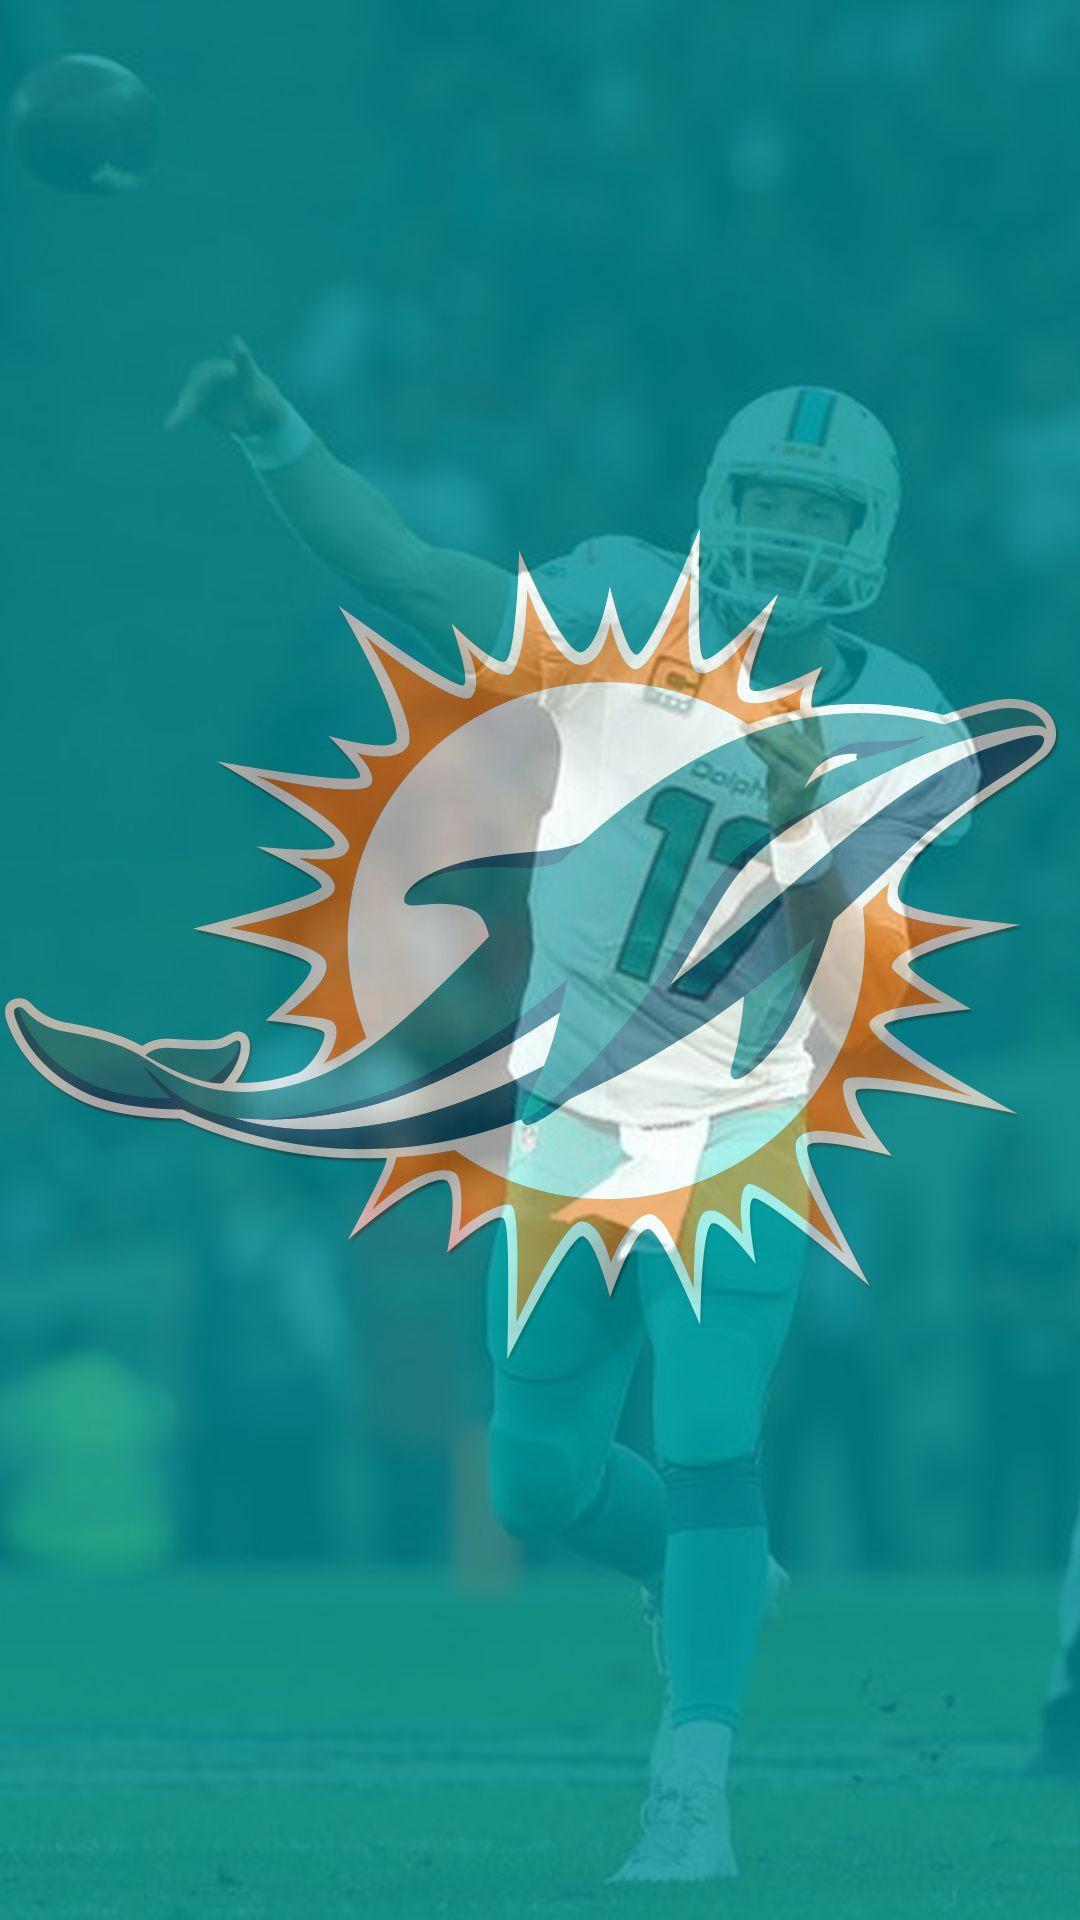 Hey Fin Fans. Dropping by with a few wallpaper. Let me know what